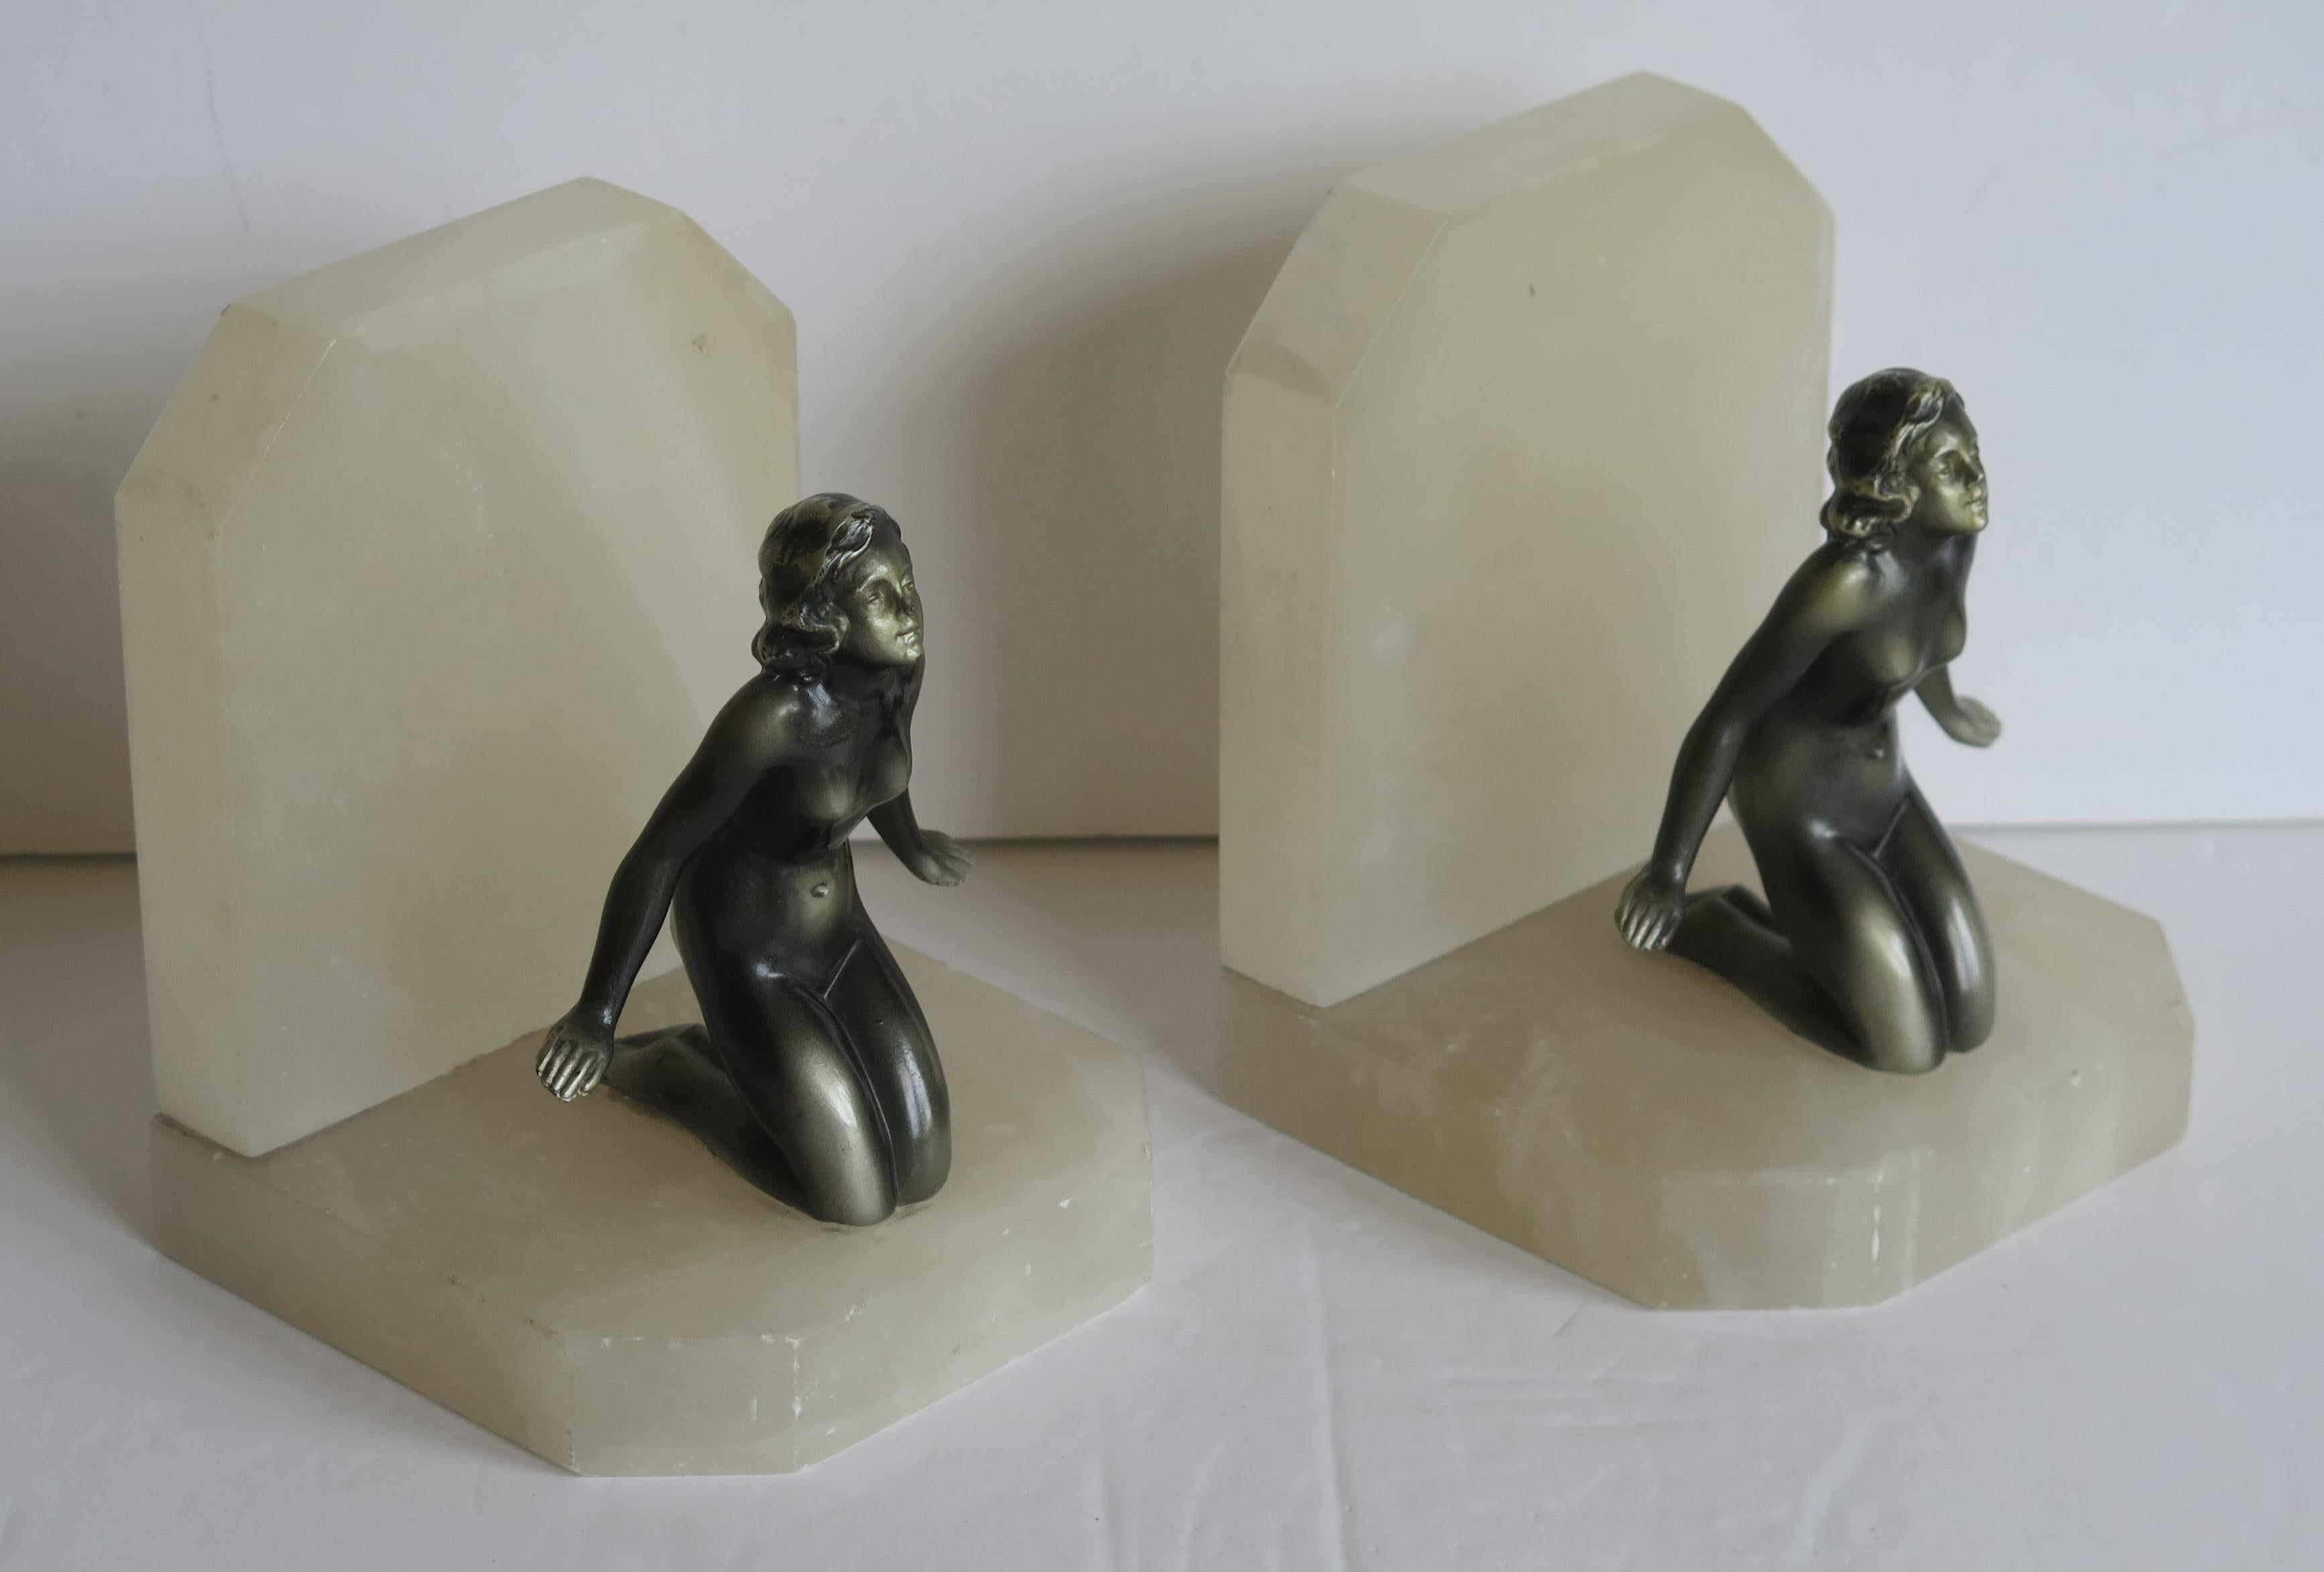 20th Century Art Deco Bookends Metal Lady Figures on Stone Bases, French, circa 1930